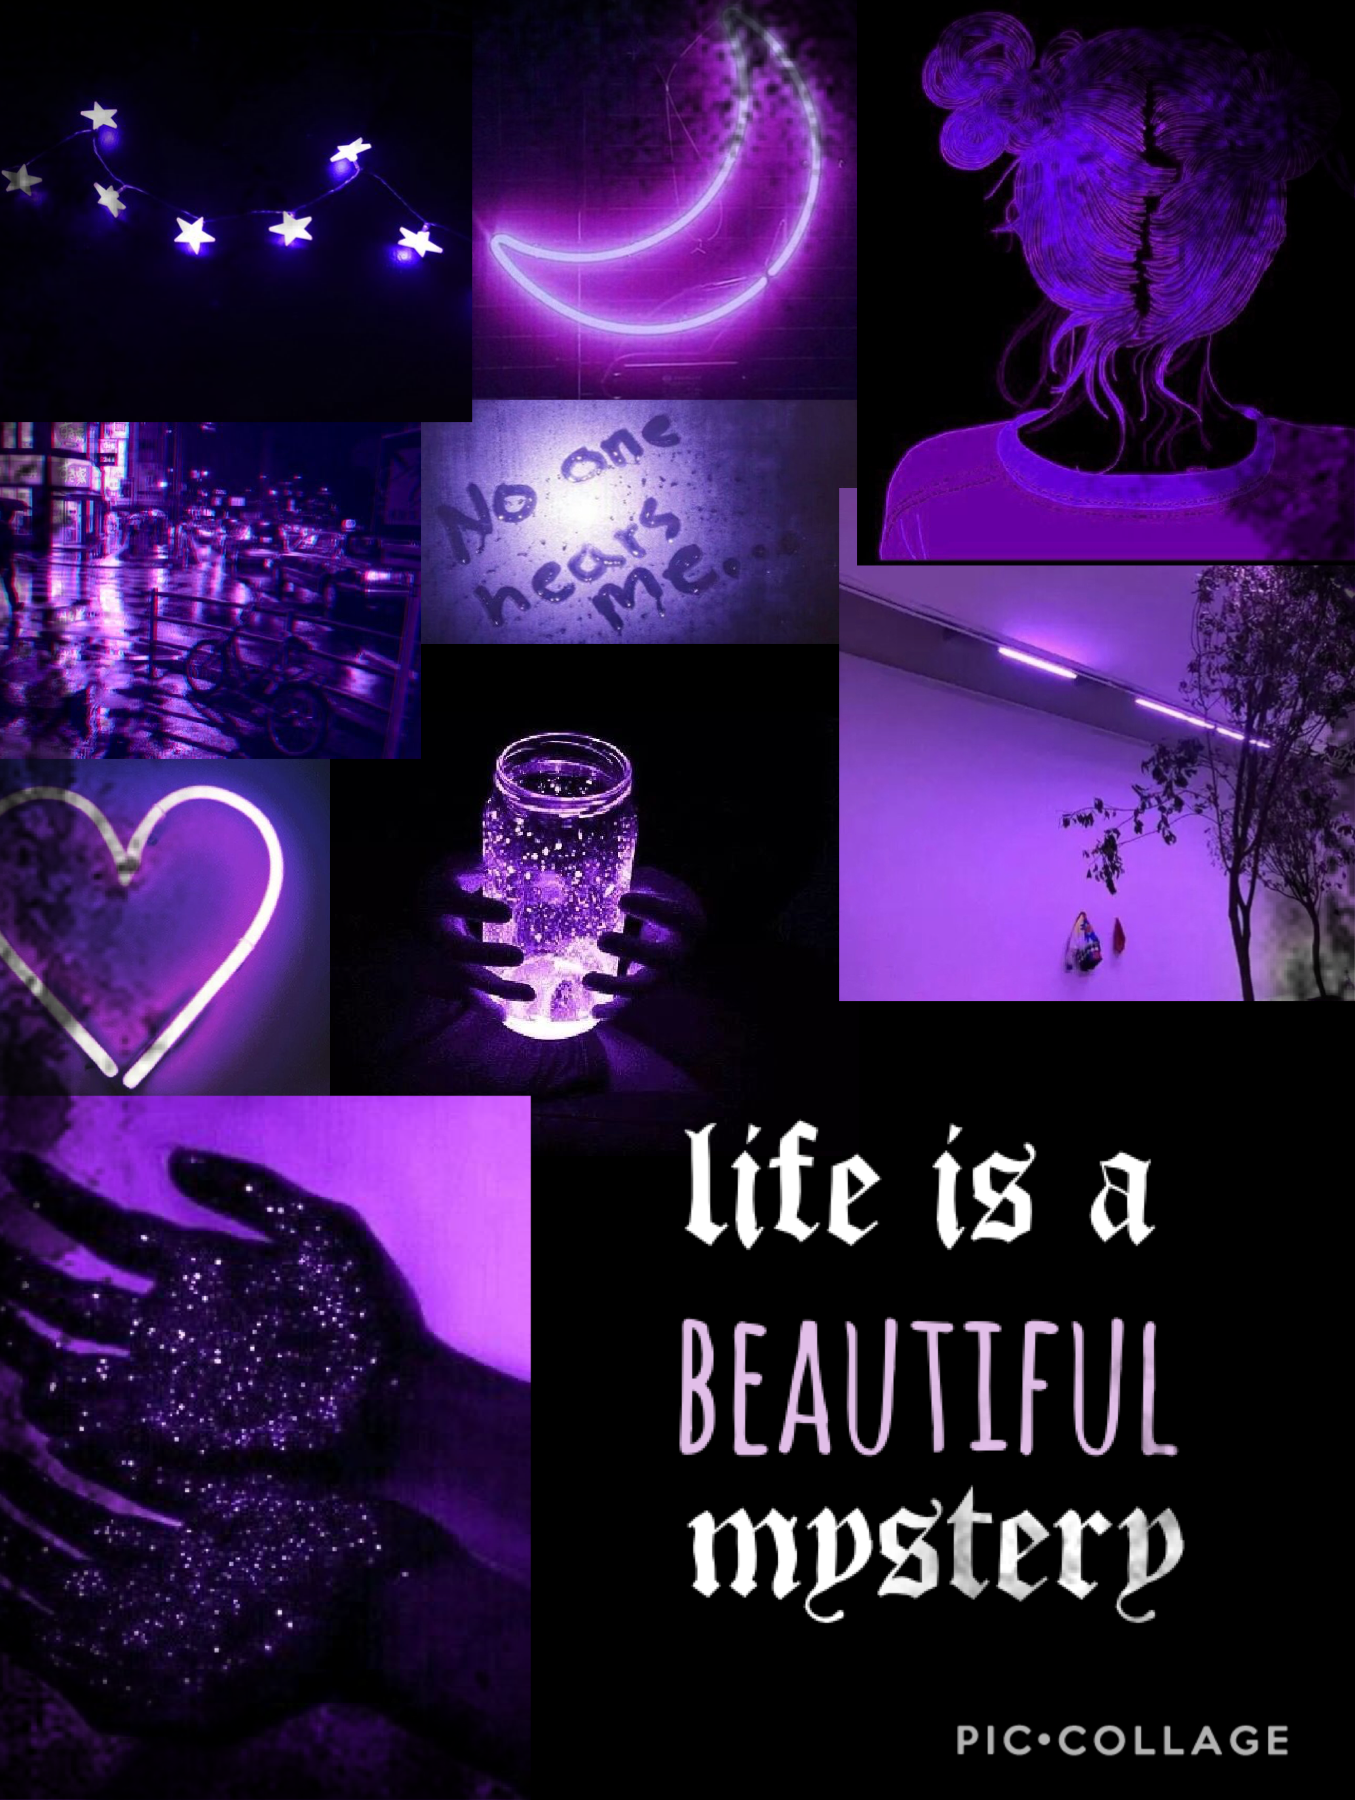 life is a beautiful mystery (tap)

hey! welcome to my collage! if you recommend and themes, give tips, or advice for my account! Thank youuuu!!!💕💕💕